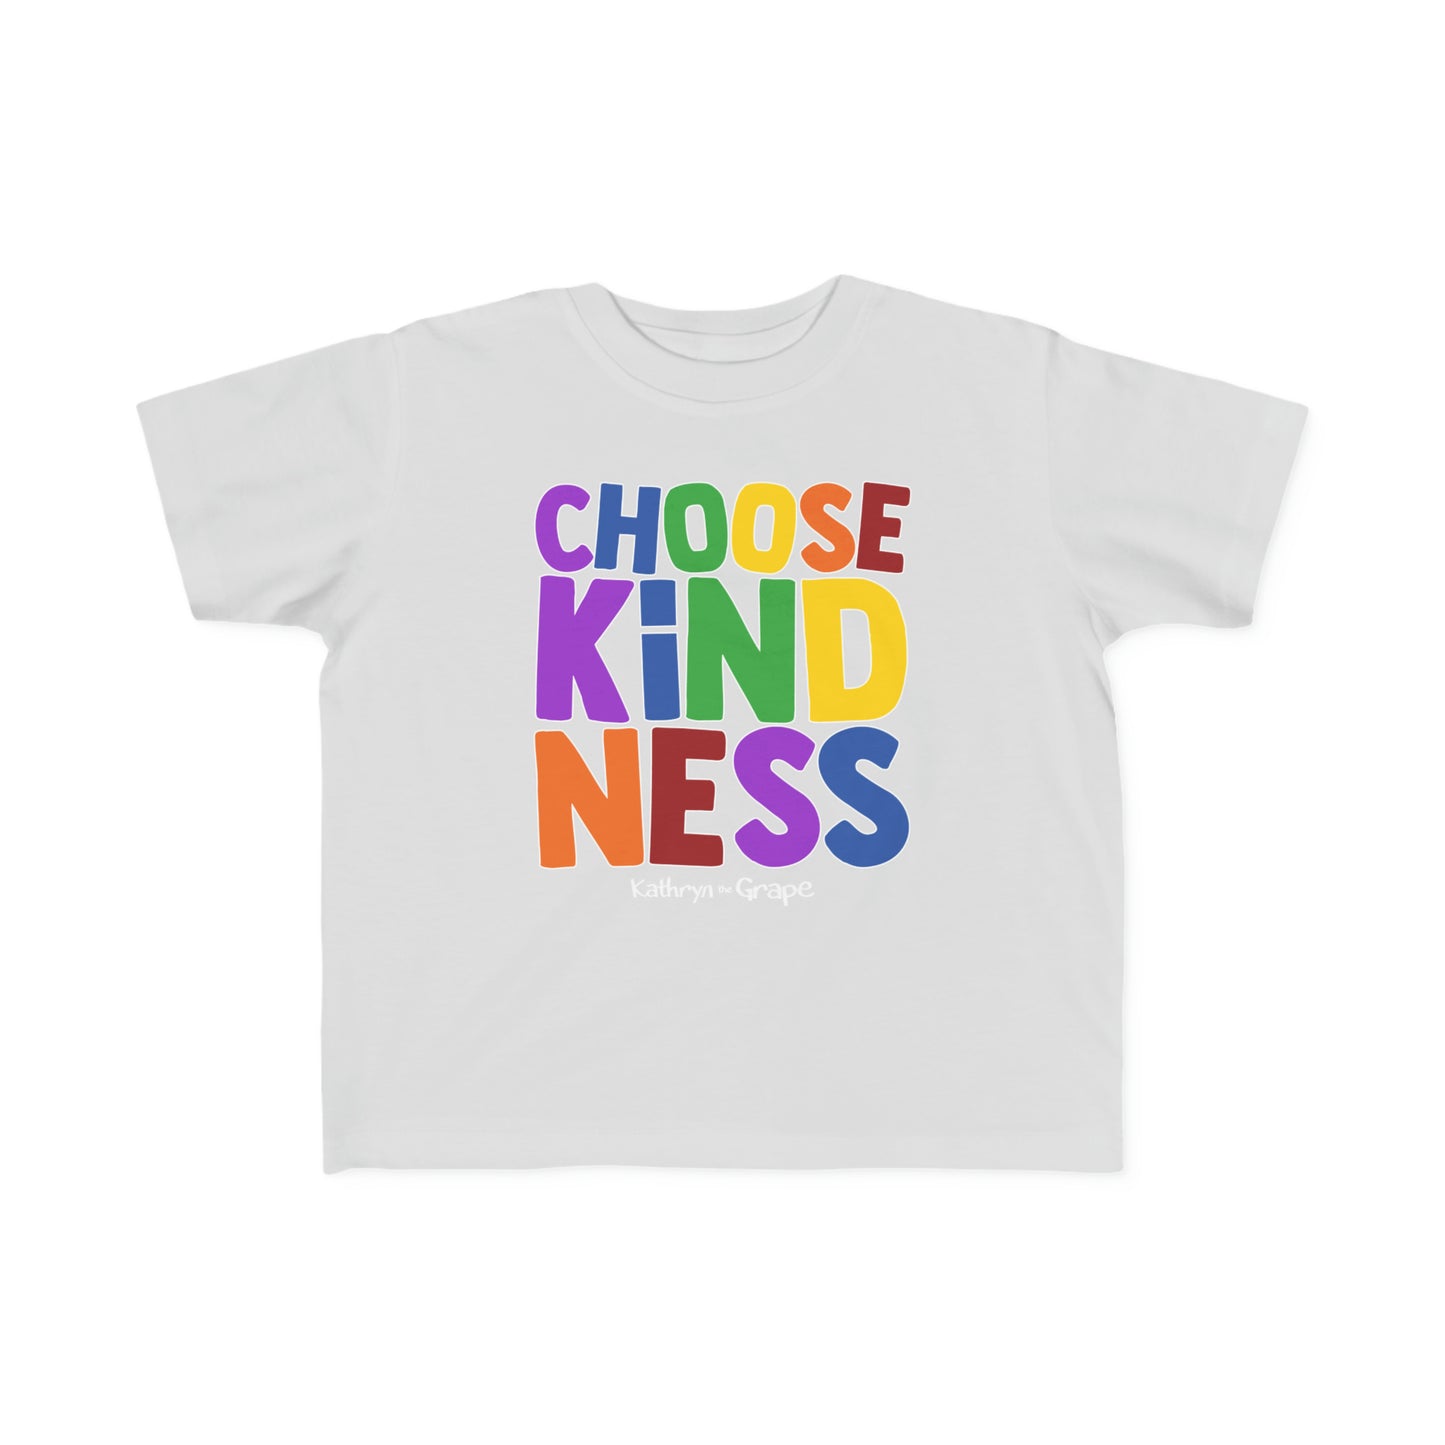 Kathryn the Grape Choose Kindness Toddler's Fine Jersey Tee